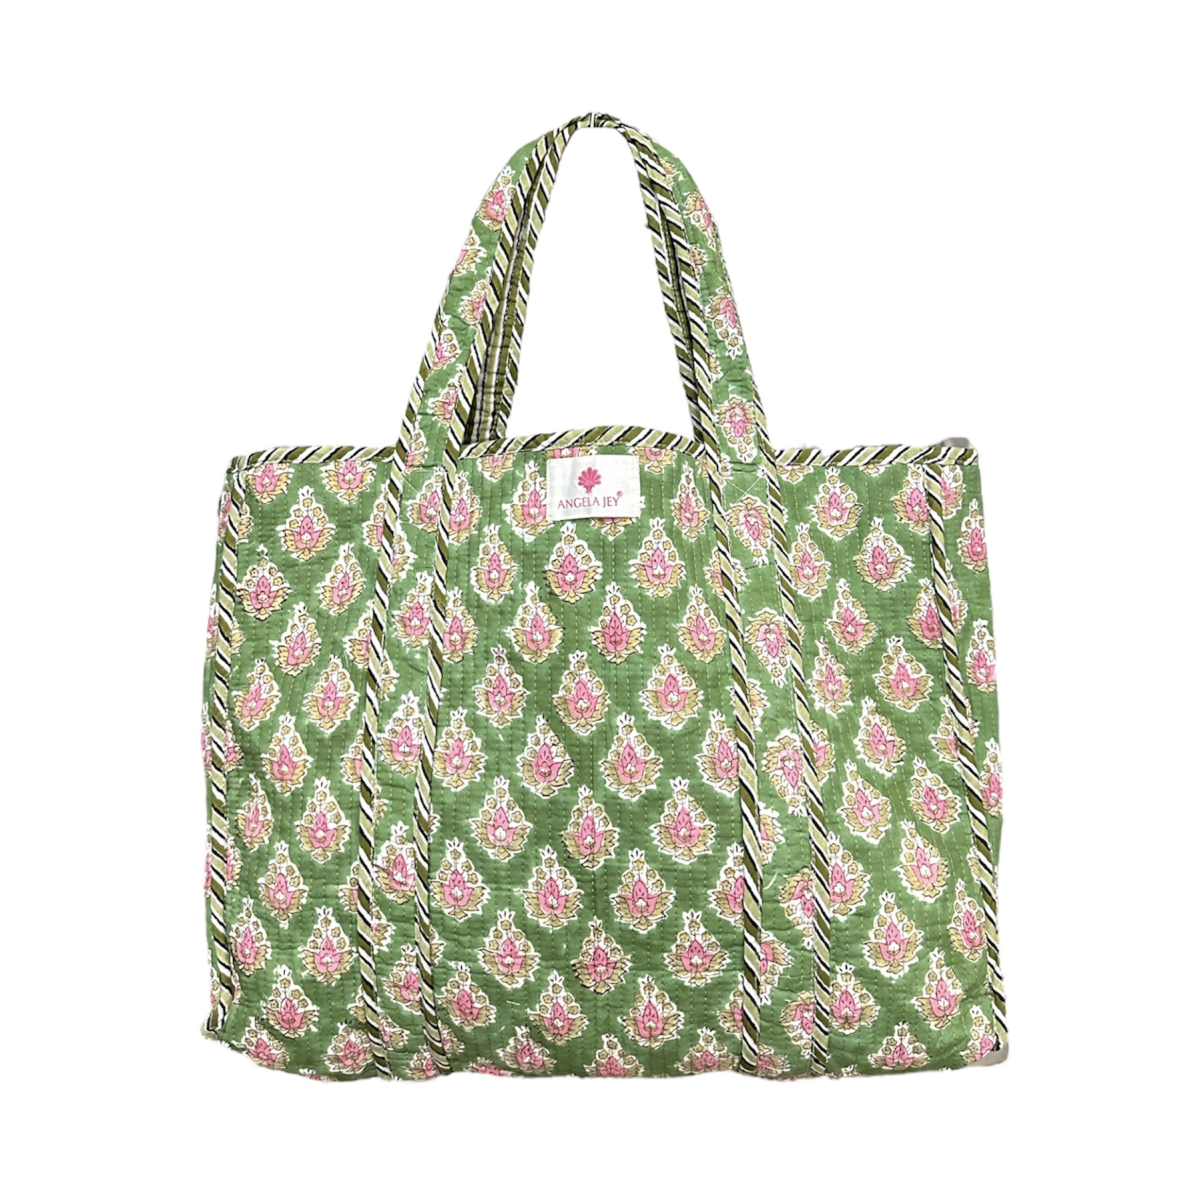 Block Printed Cotton Quilted Bag - Green Tea